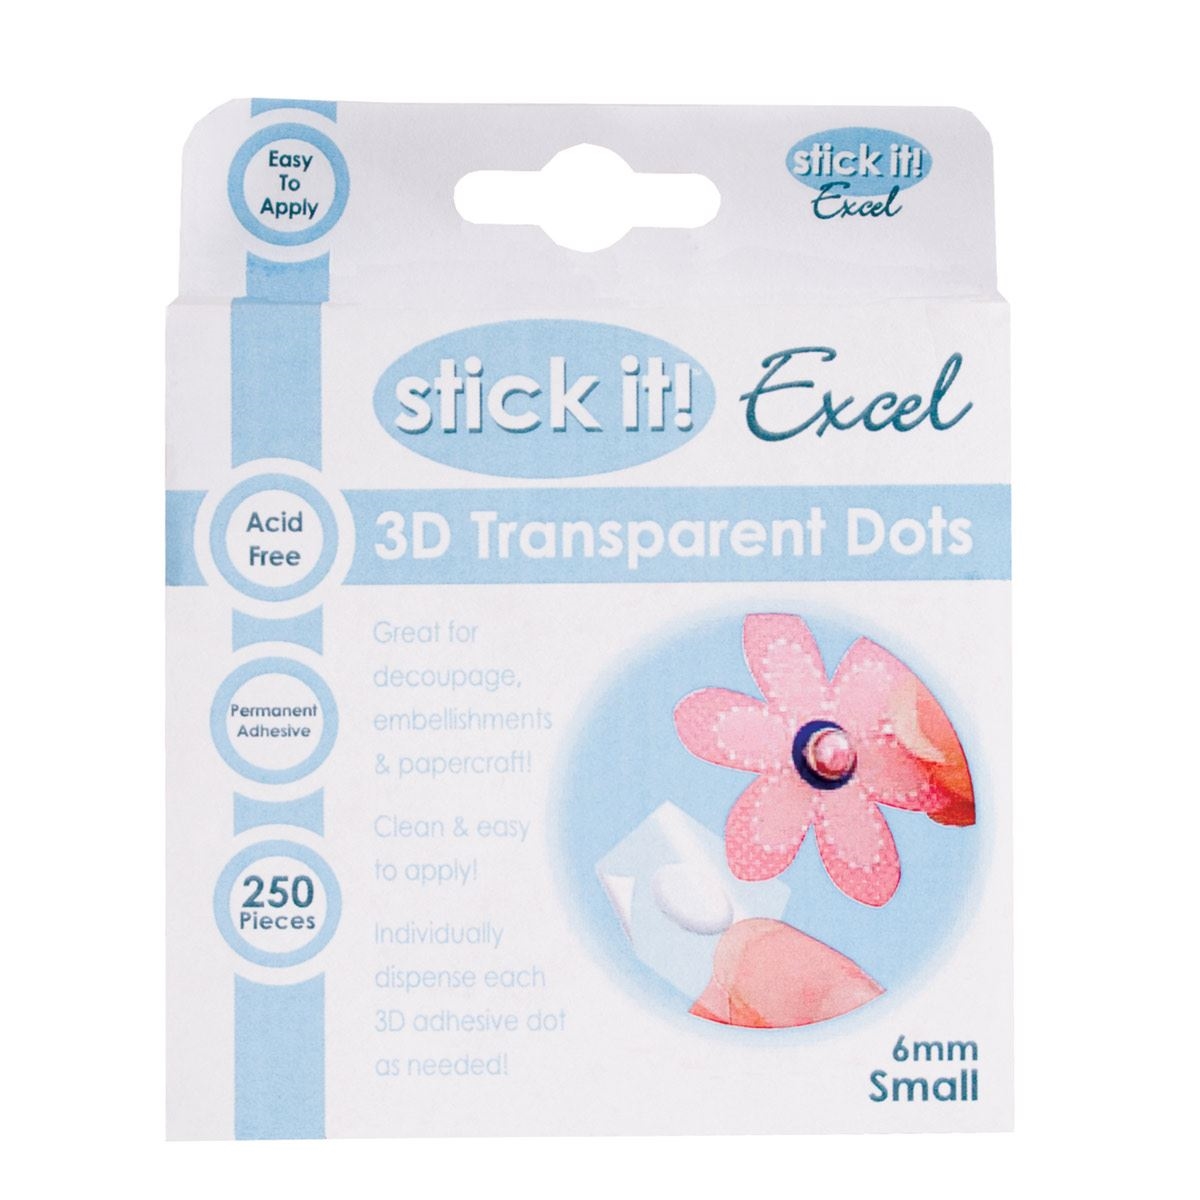 STICK IT EXCEL 3D TRANSPARENT DOTS 6mm SMALL. STI4532000 MRRP £ 4.00 OUR PRICE £3.20